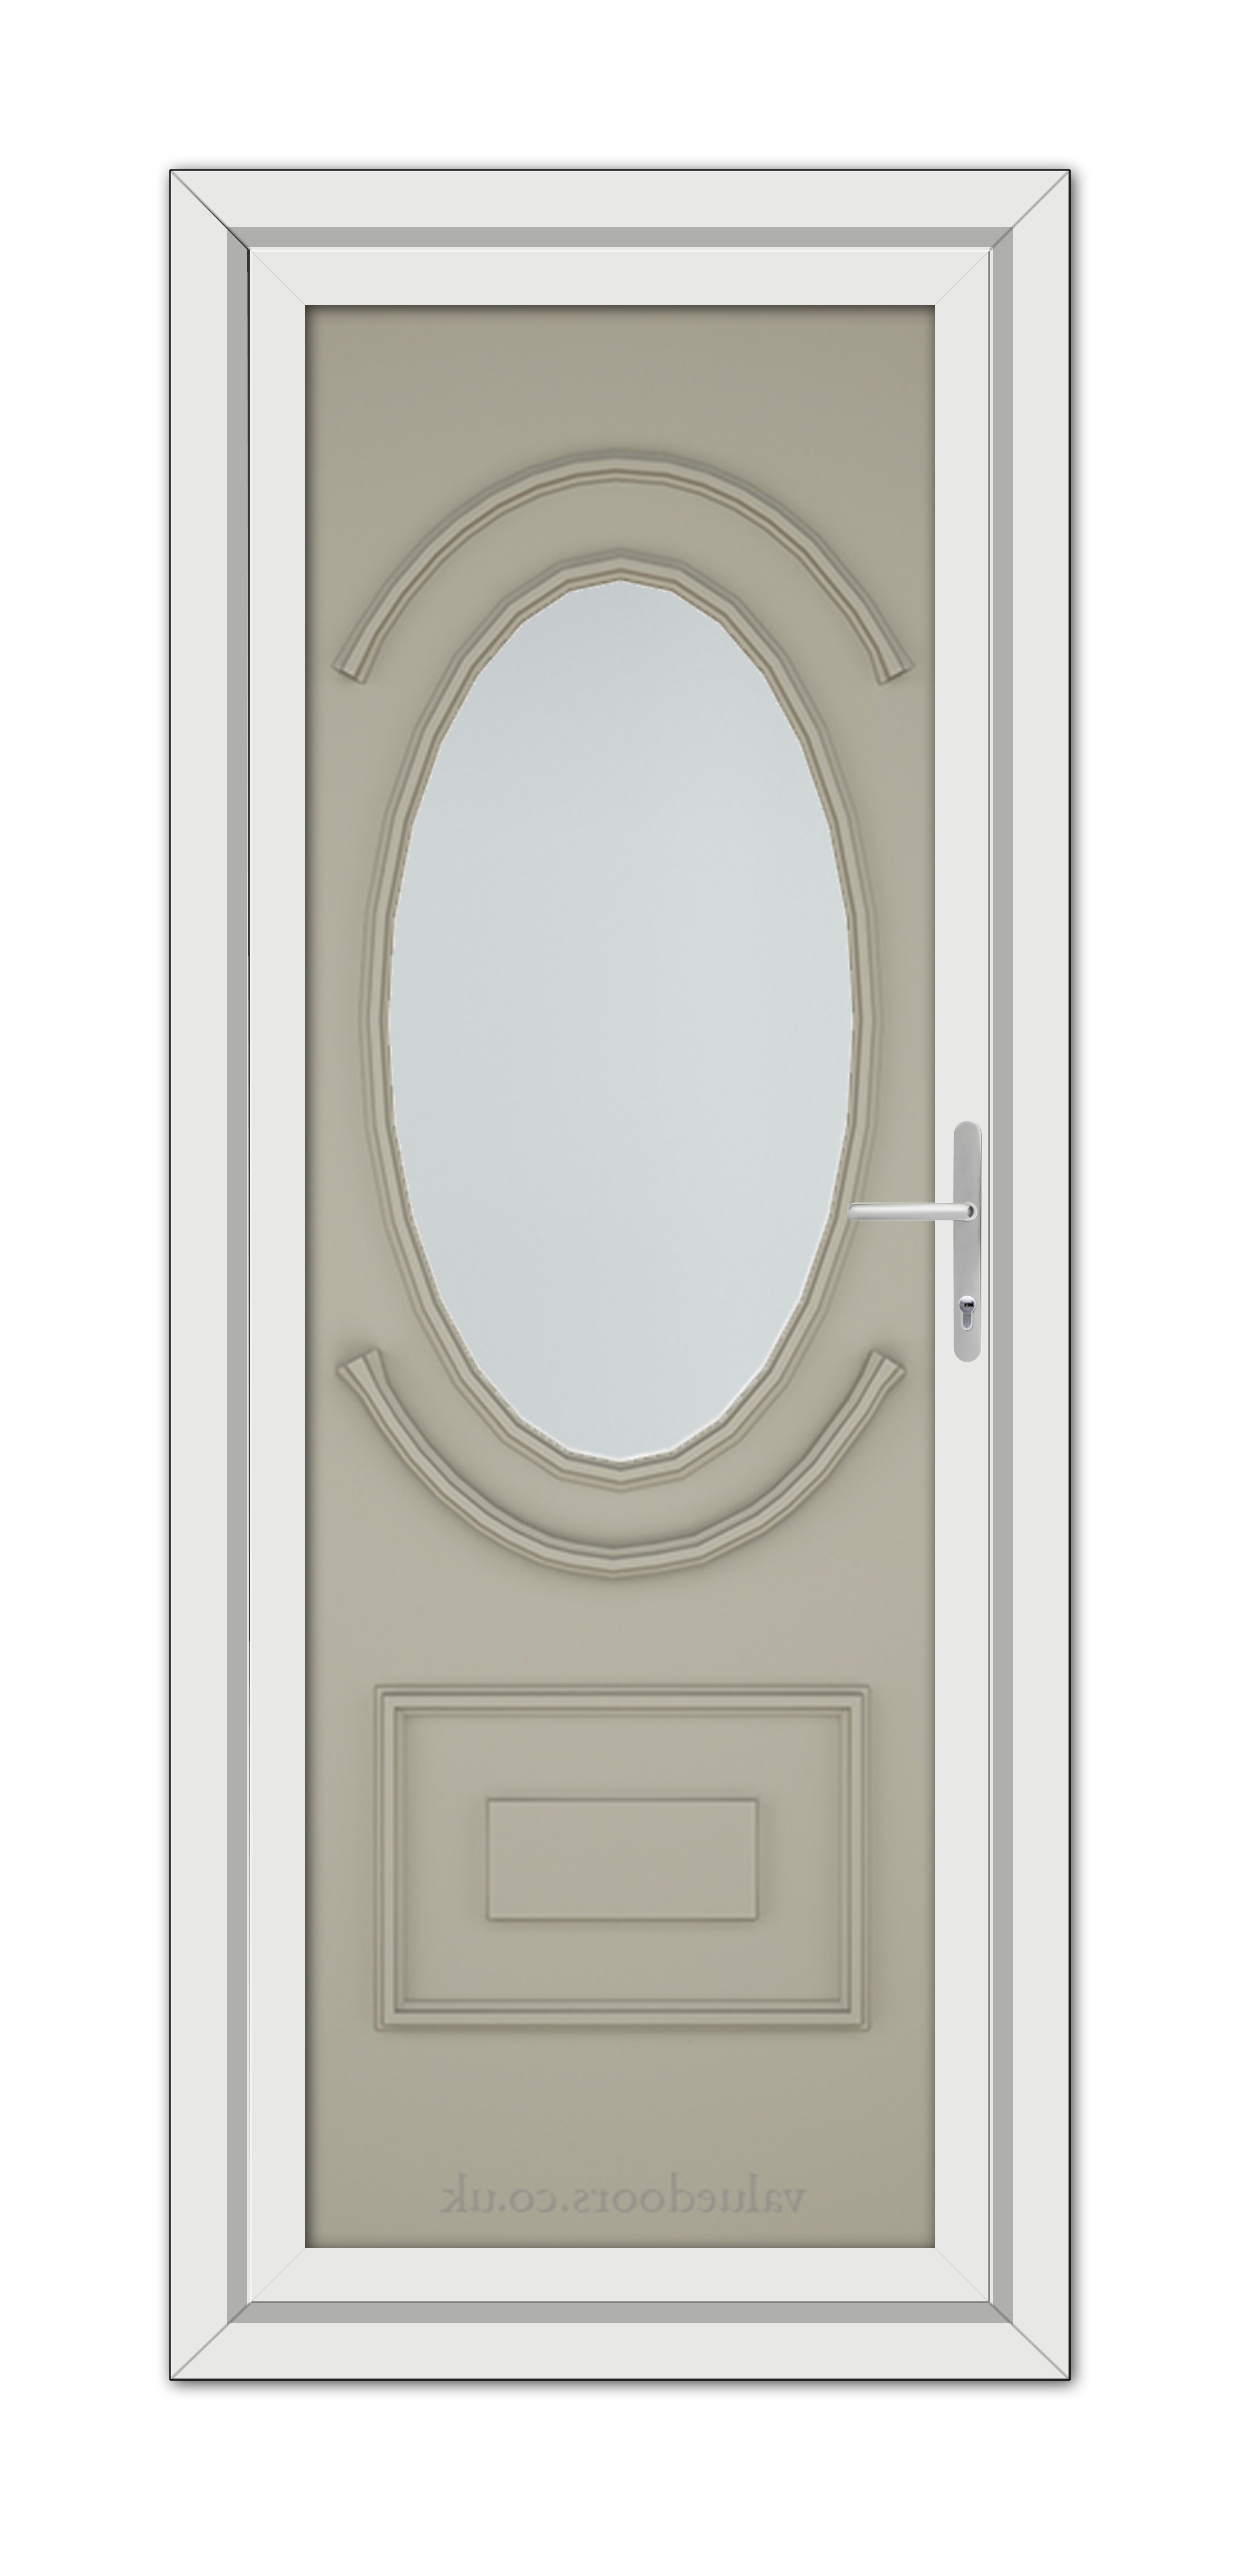 A vertical image of a closed Pebble Grey Richmond uPVC Door with an oval-shaped window and a metallic handle, set within a white frame.